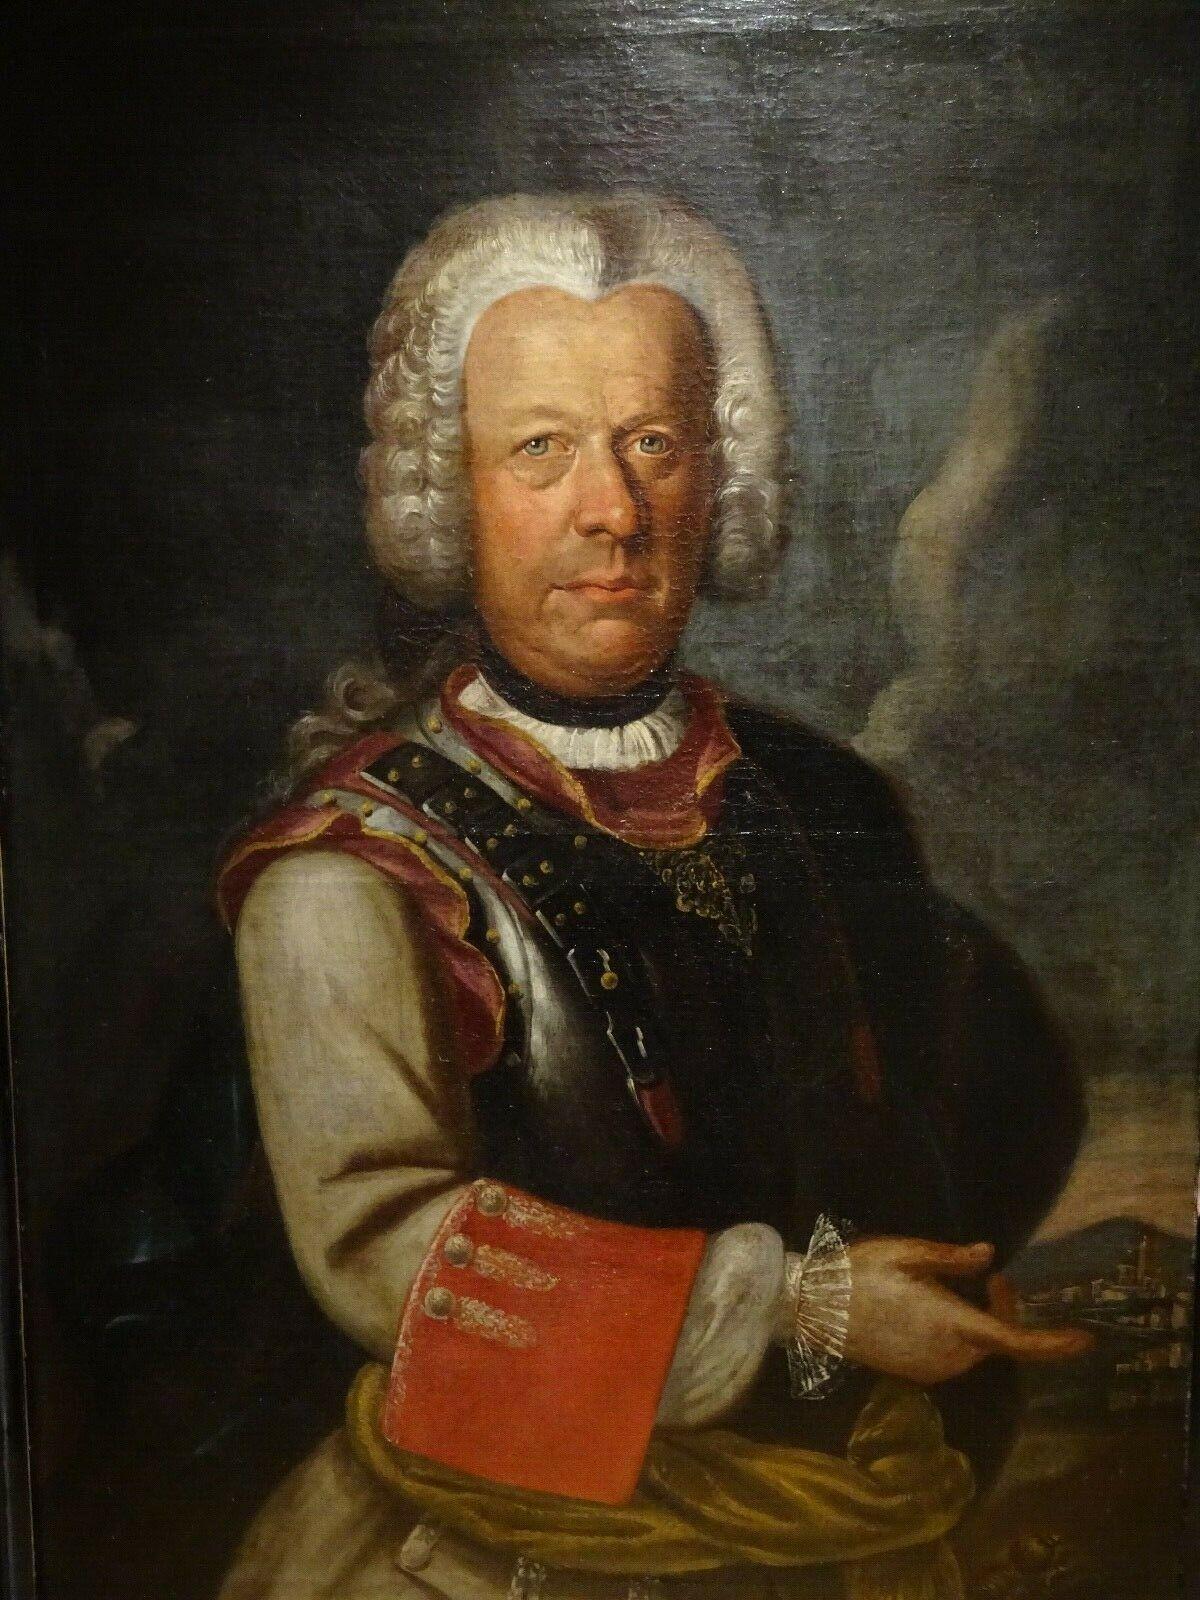 Unknown Portrait Painting - Portrait Of A Piedmont Nobleman & Military Officer, House Of Savoy, early 18th c